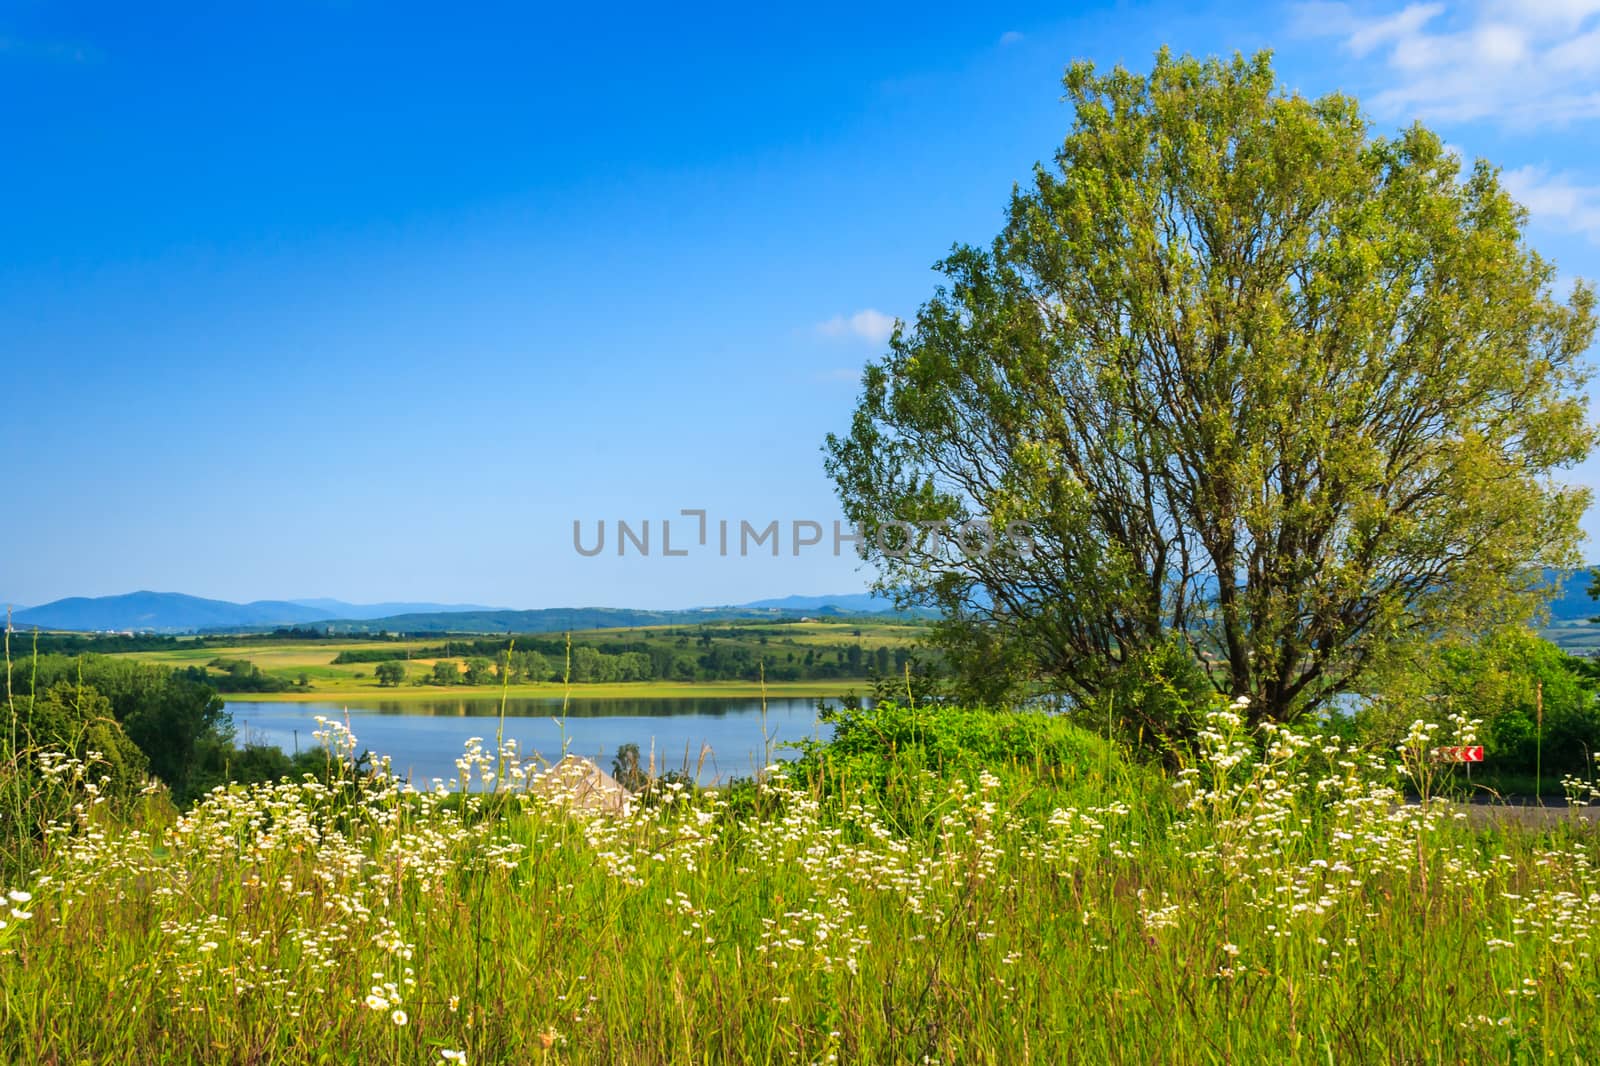 meadow with wild flowers and a tree in front of the lake by Pellinni